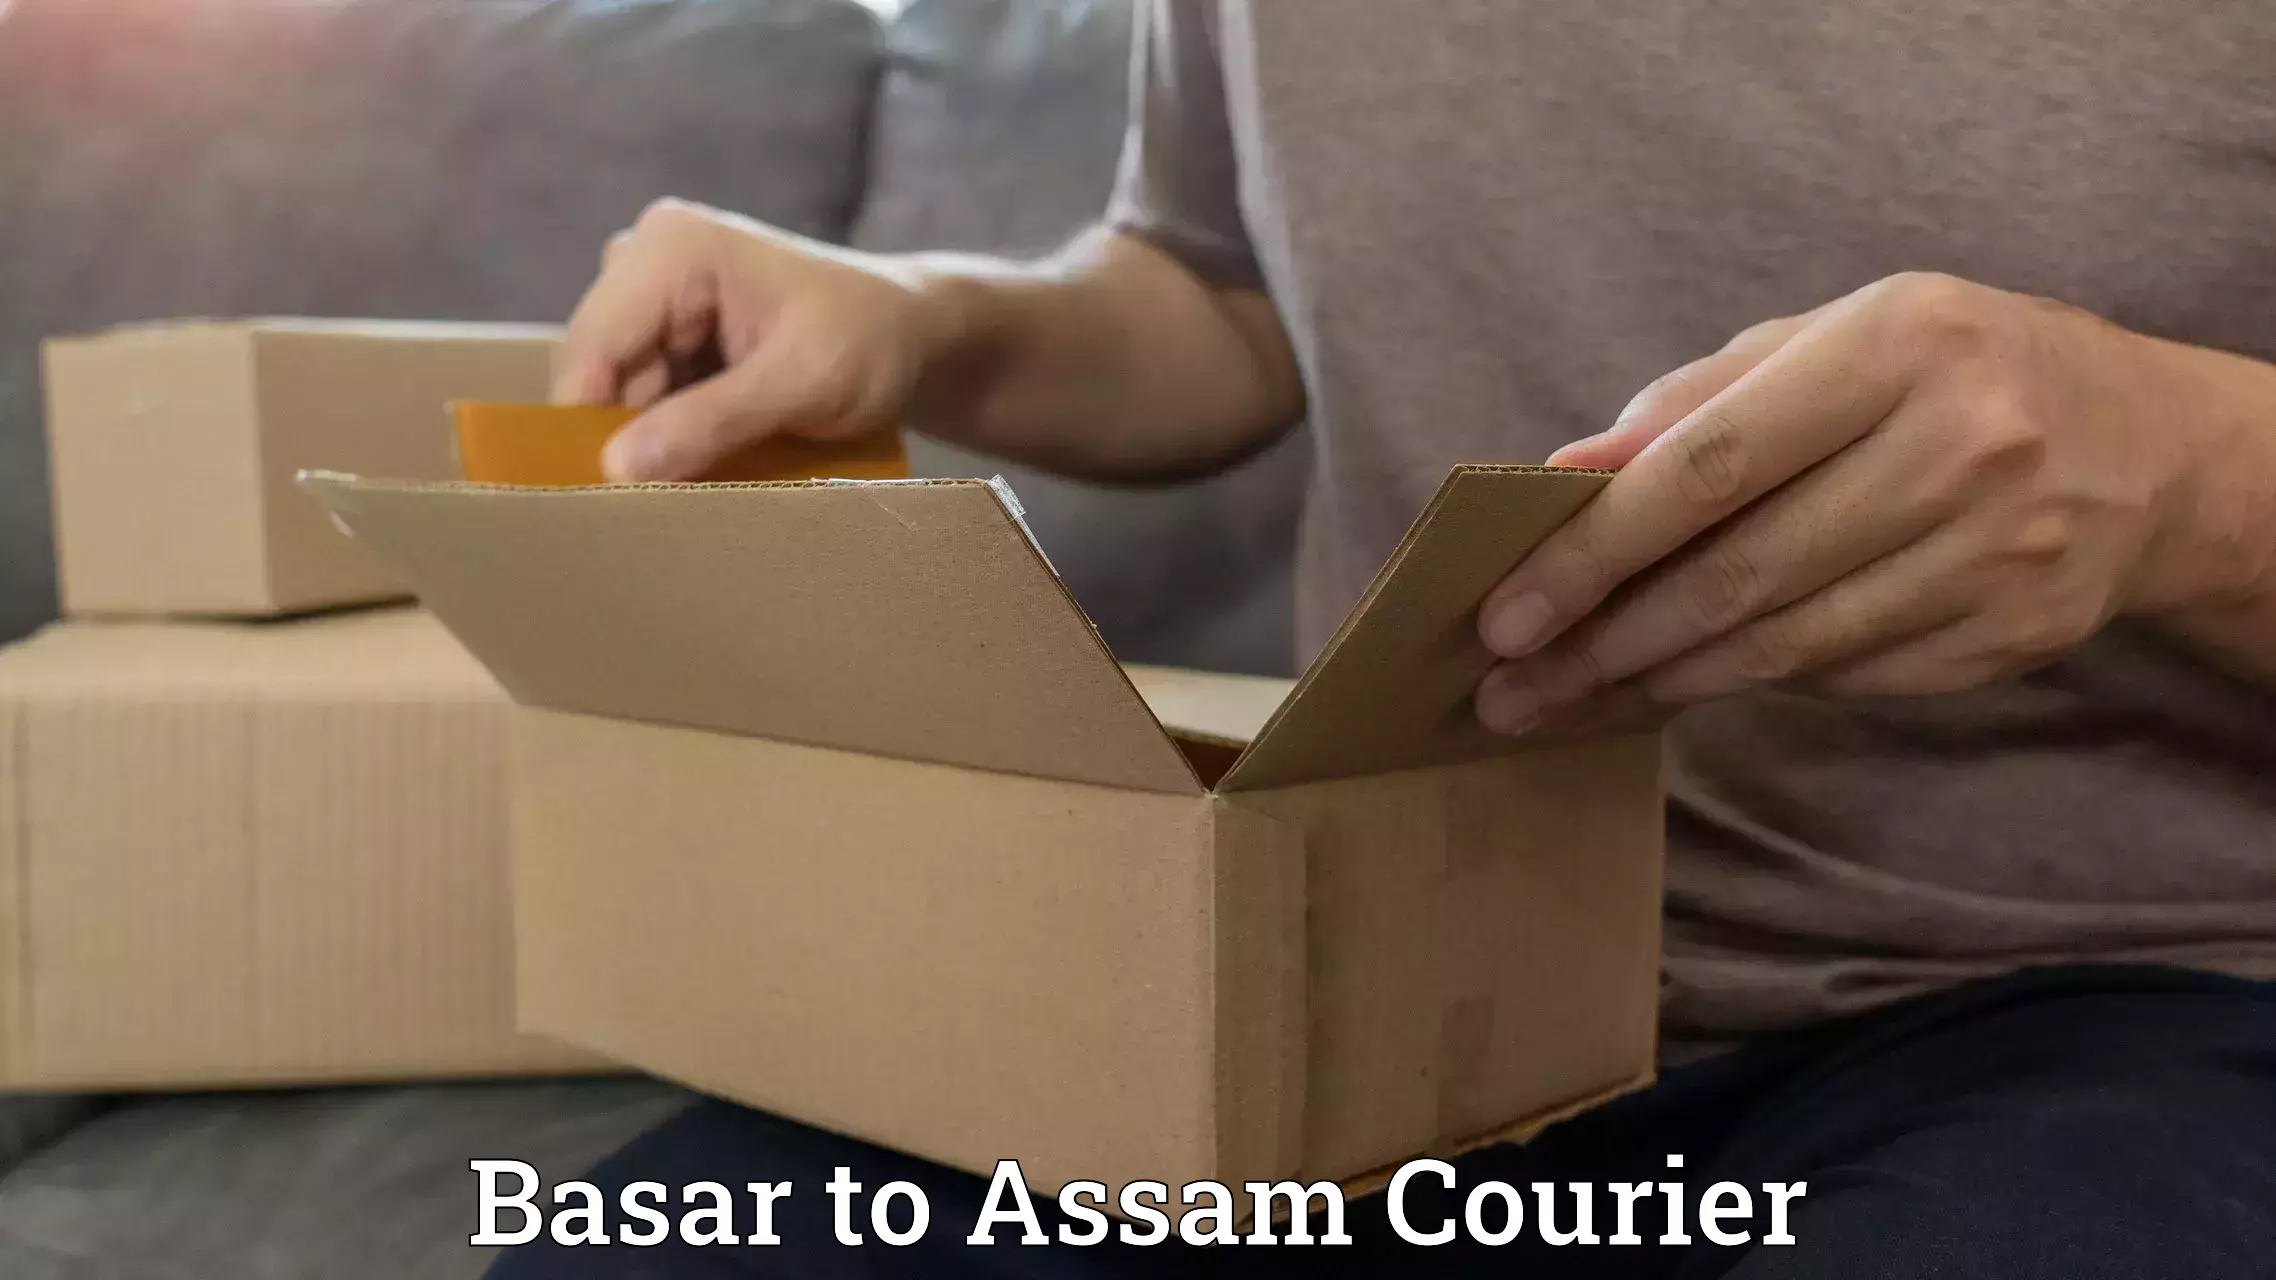 Delivery service partnership Basar to Tezpur University